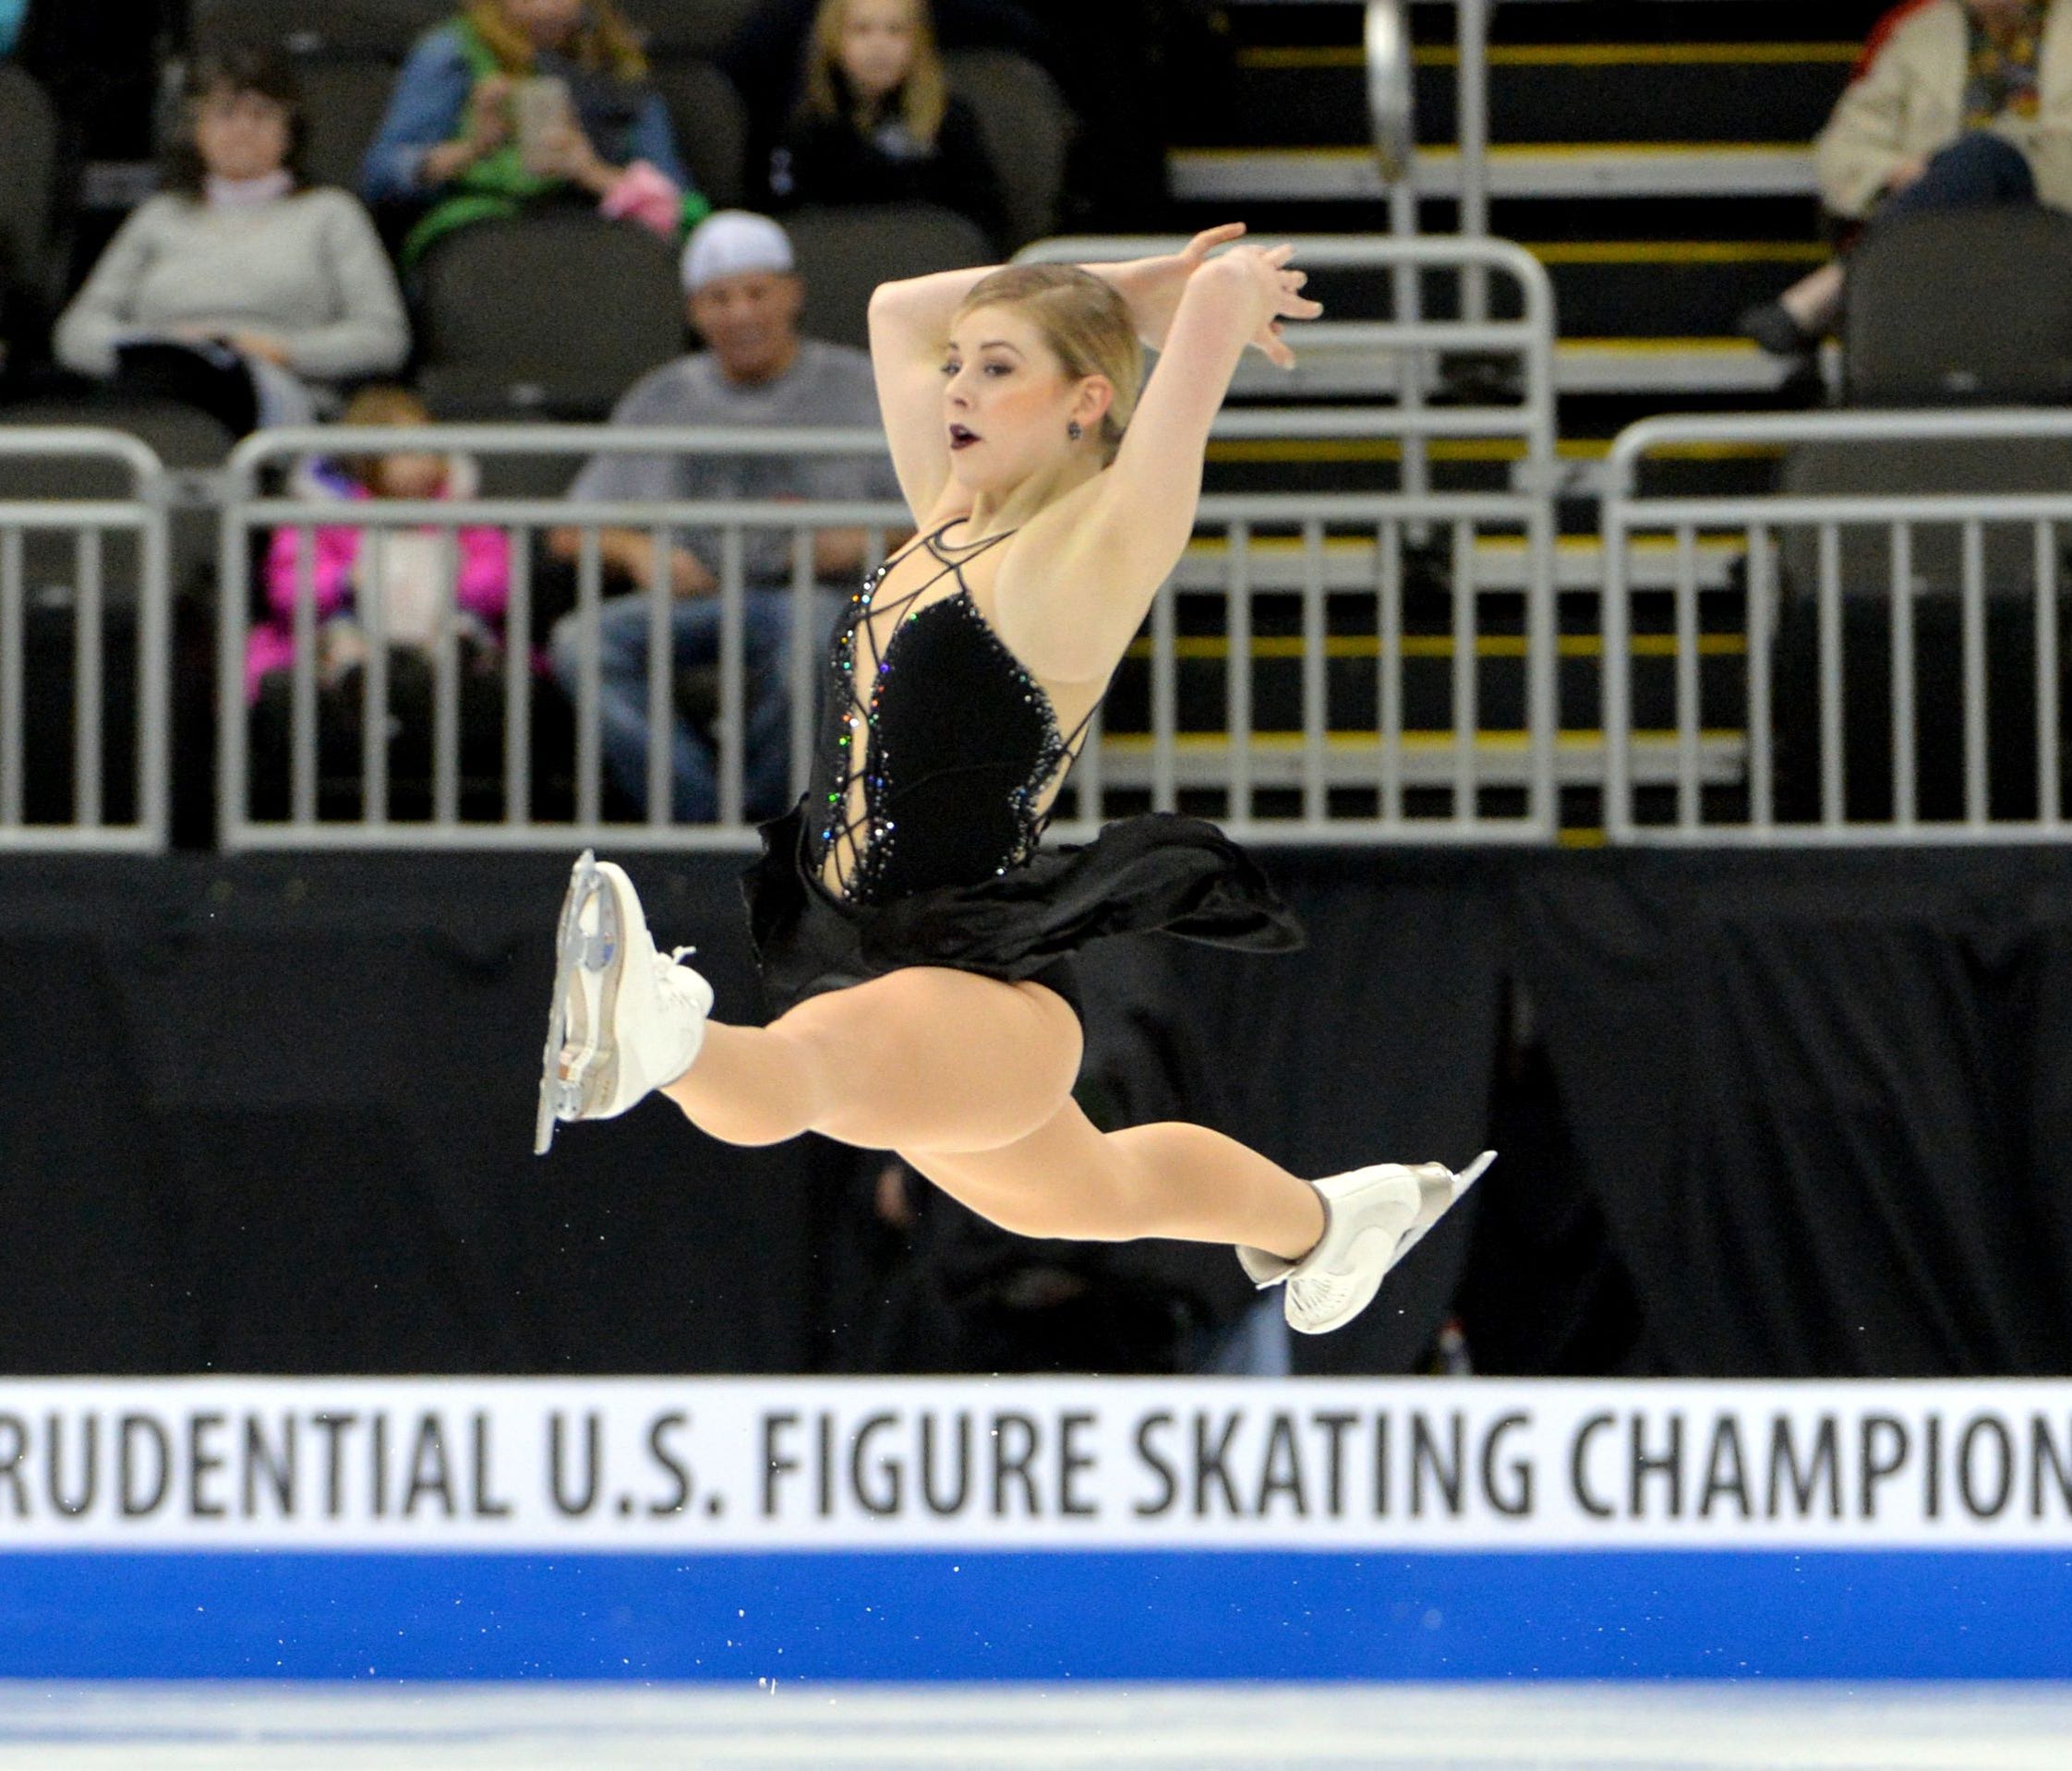 Gracie Gold during the short program in the U.S. Figure Skating Championship at Sprint Center in Kansas City on Jan. 19.